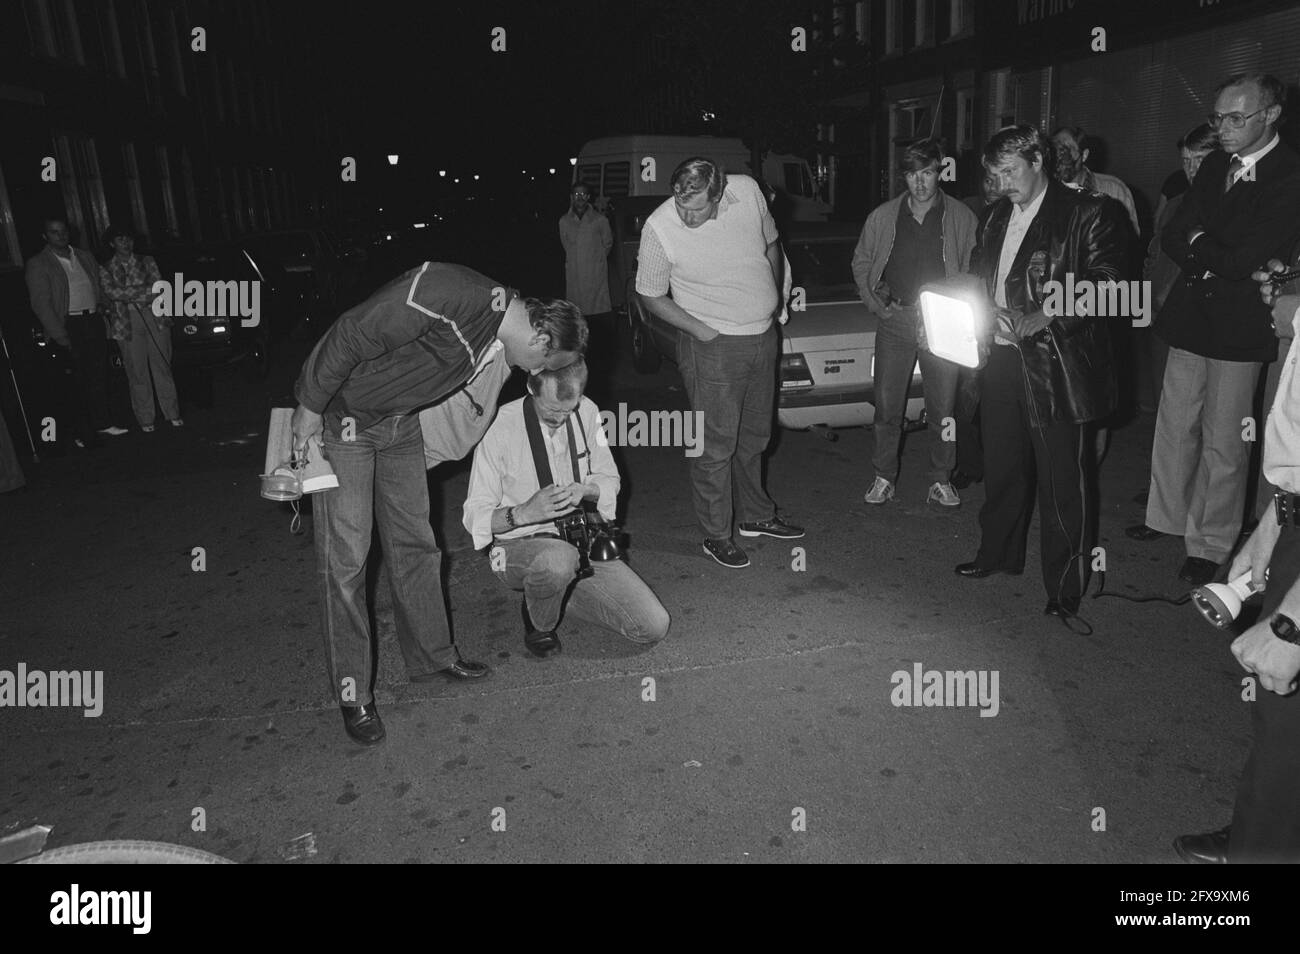 Neighborhood investigation by police in Amsterdam's Lootstraat into the murder of an approximately 30-year-old man, August 31, 1981, murders, investigation, police, The Netherlands, 20th century press agency photo, news to remember, documentary, historic photography 1945-1990, visual stories, human history of the Twentieth Century, capturing moments in time Stock Photo